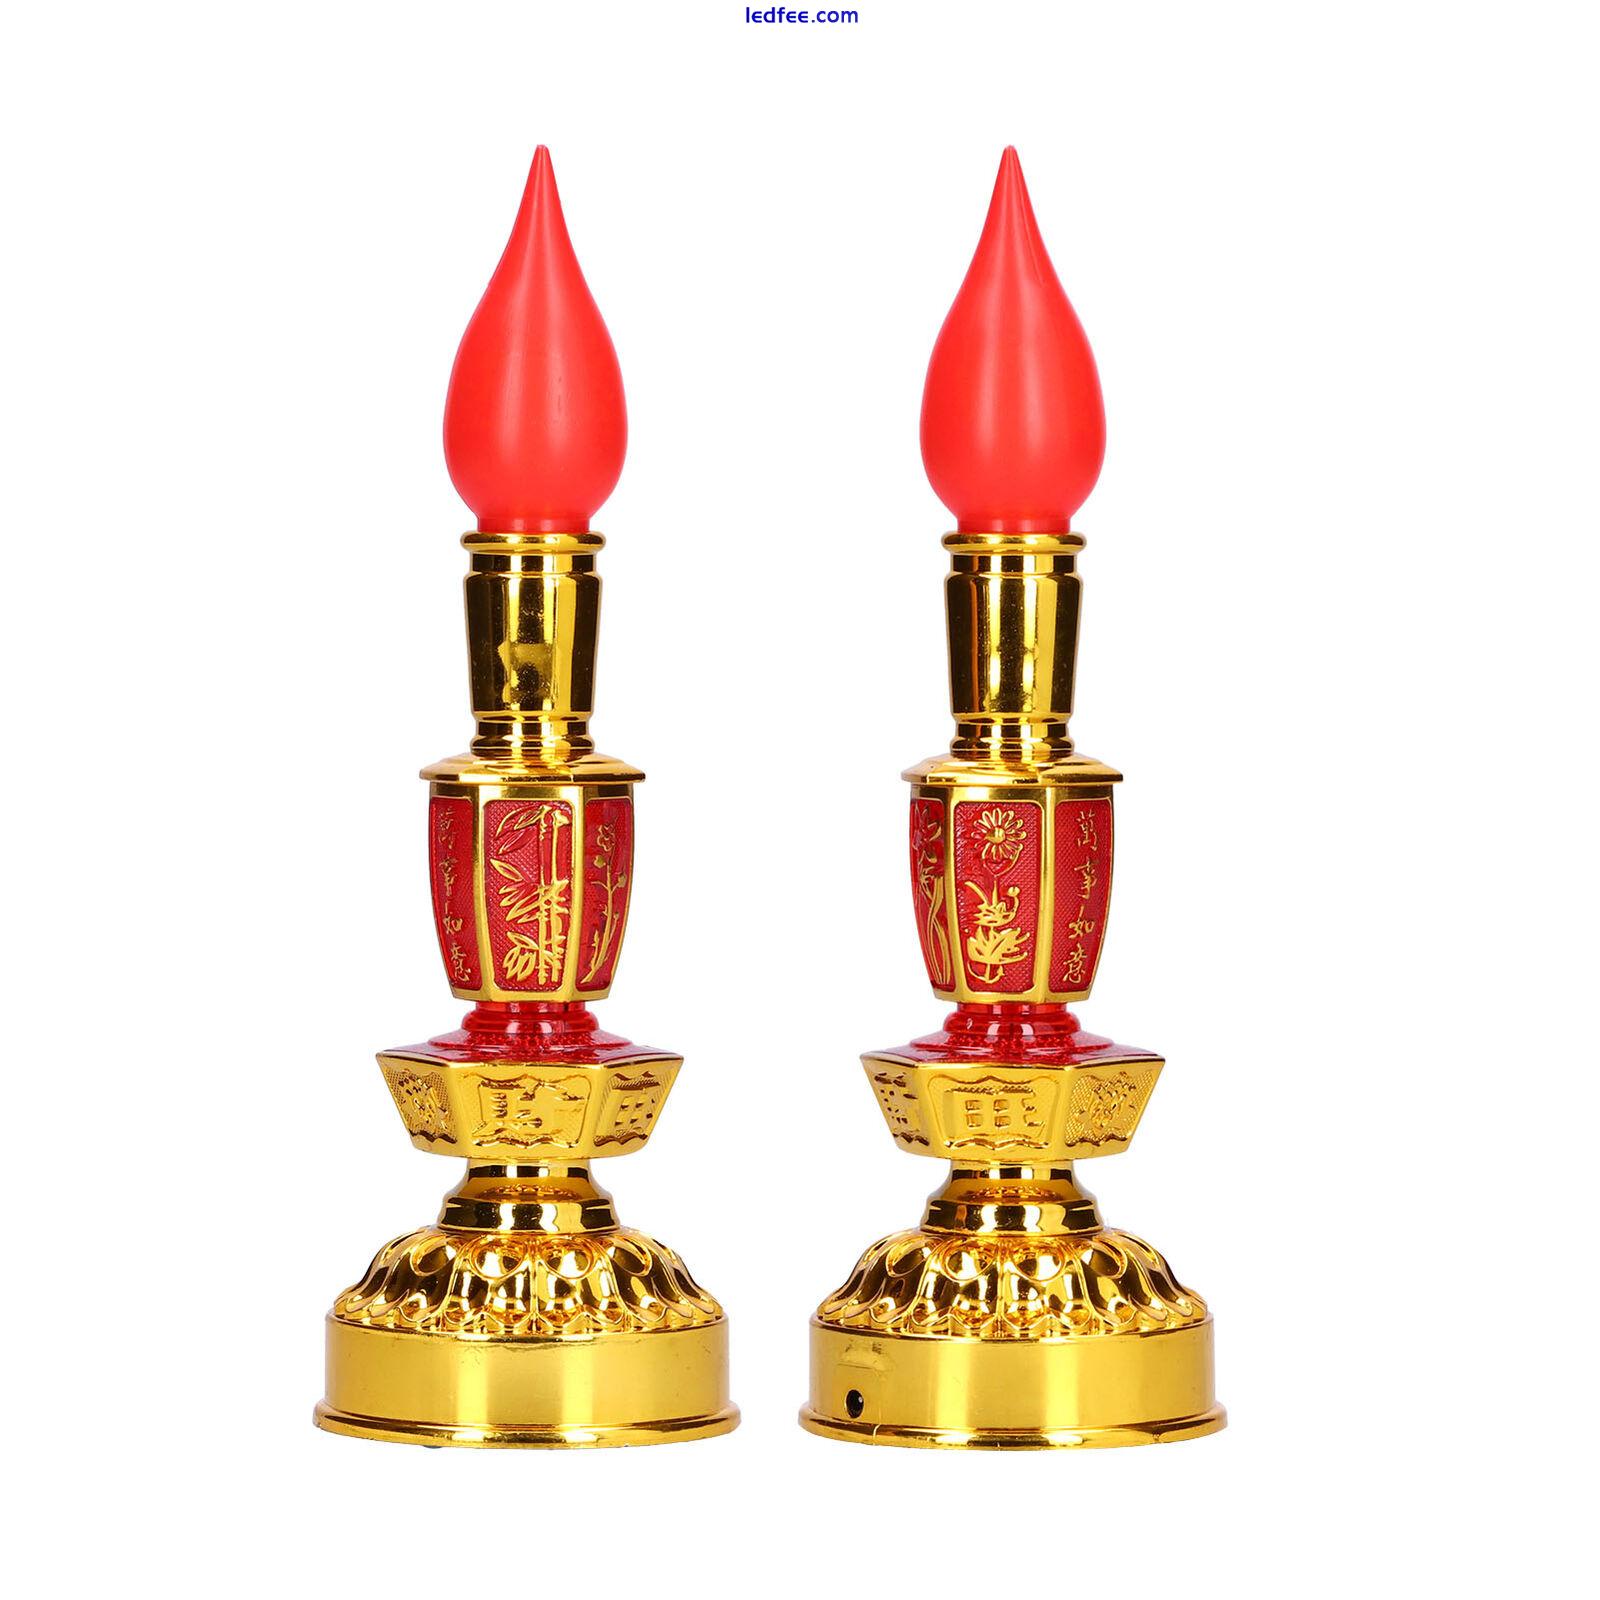 (Double Bright Electric Candle)Candle Lamp Flower Buddhist Light LED MG DG 1 